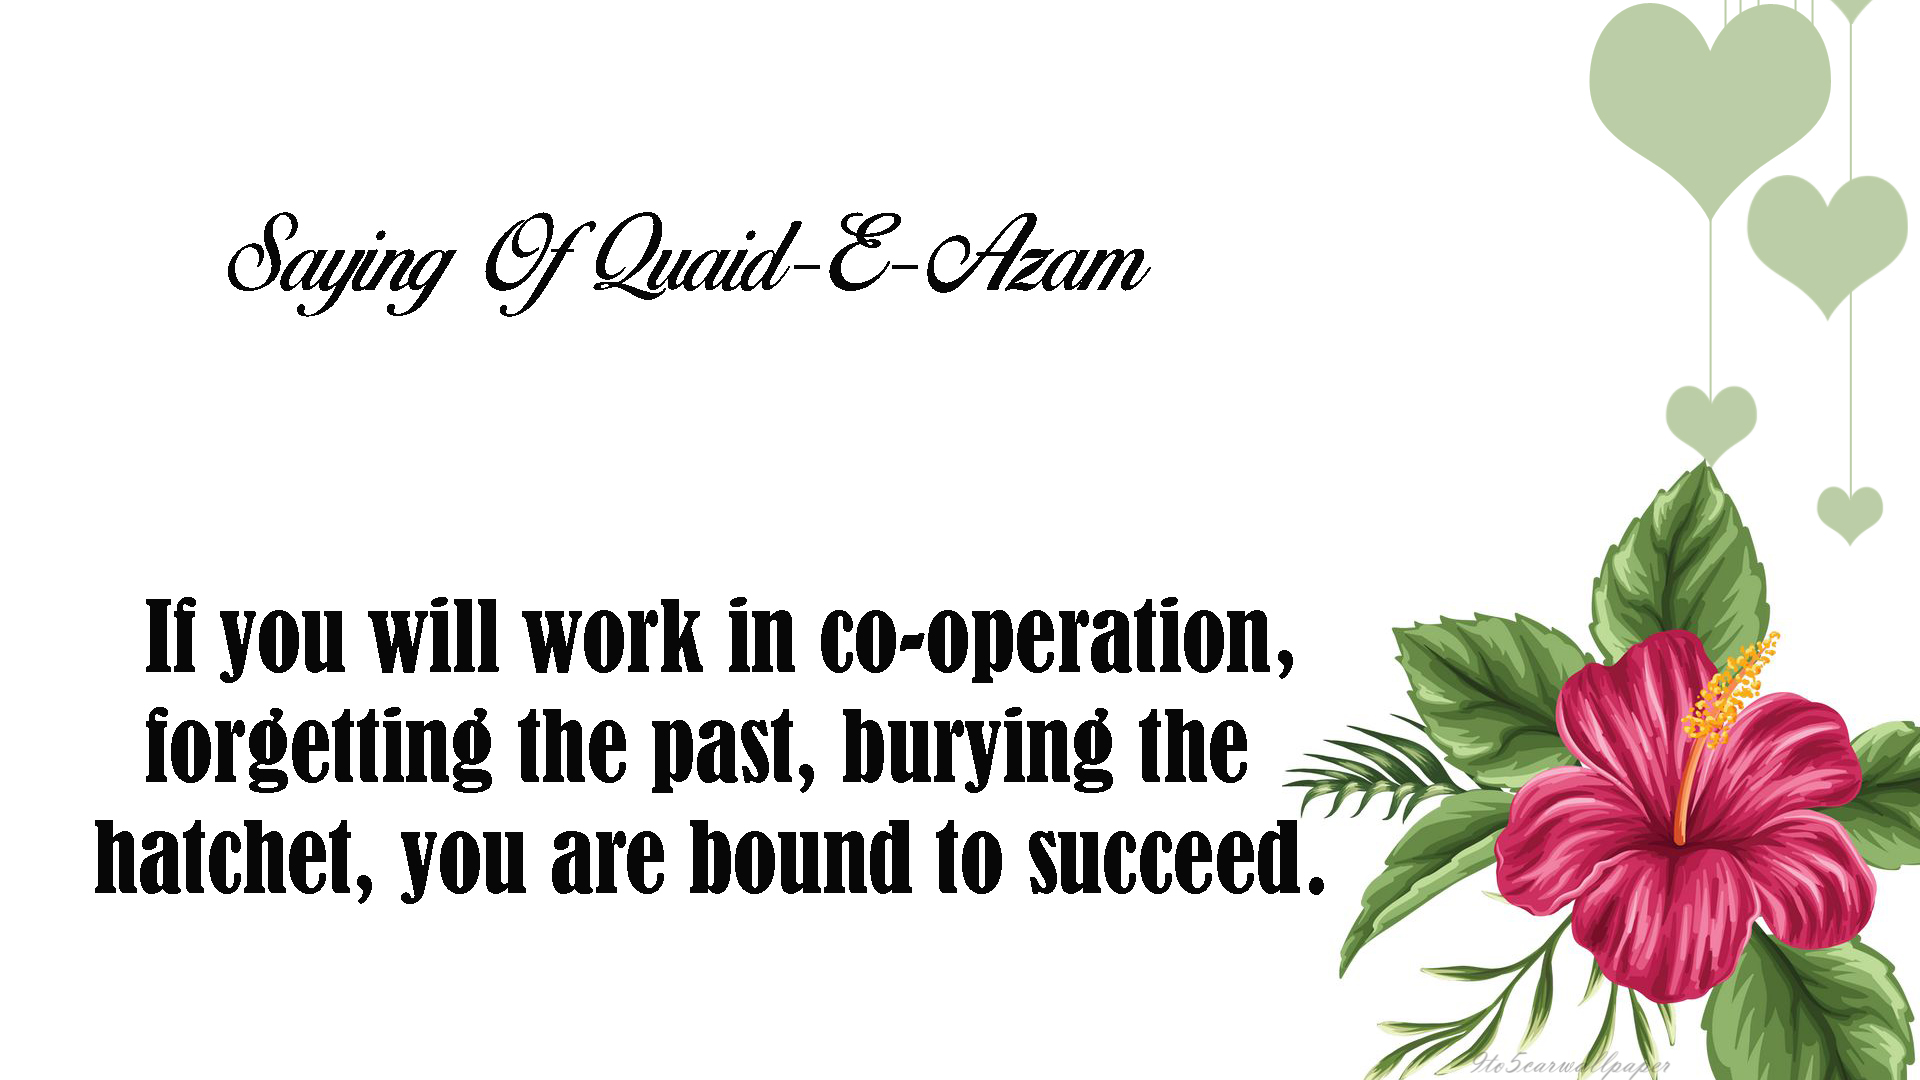 sayings-of-quaid-e-azam-quotes-posters-cards-images